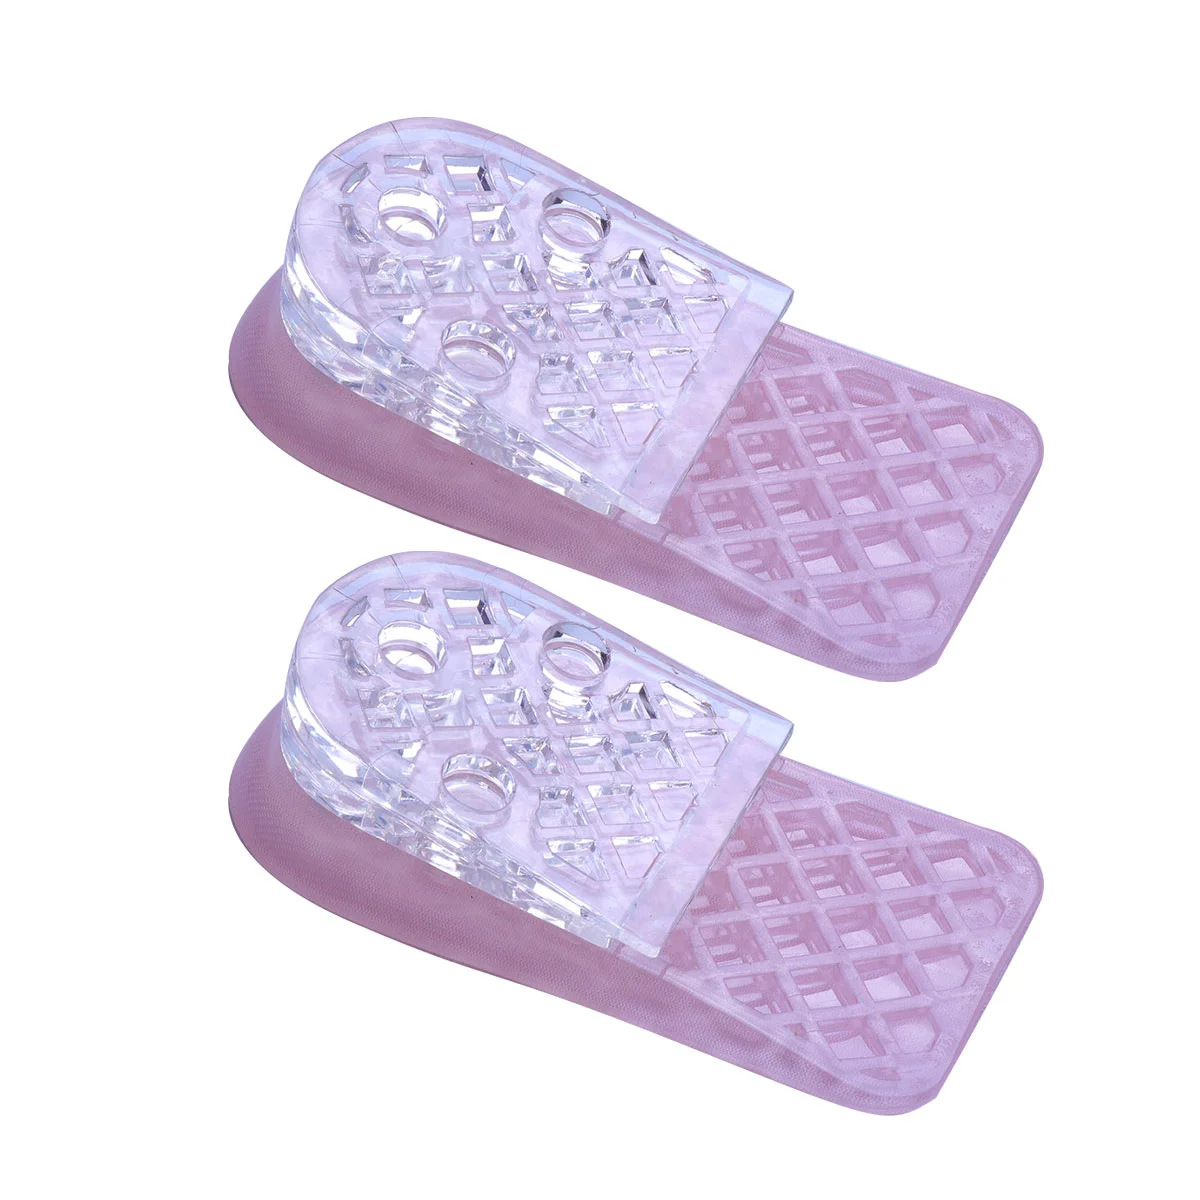 

Insole Height Increase Insoles Lift Inserts Shoe Plantar Half Honeycomb Absorbing Fasciitis Elevator Sleeve Shoes Heightening